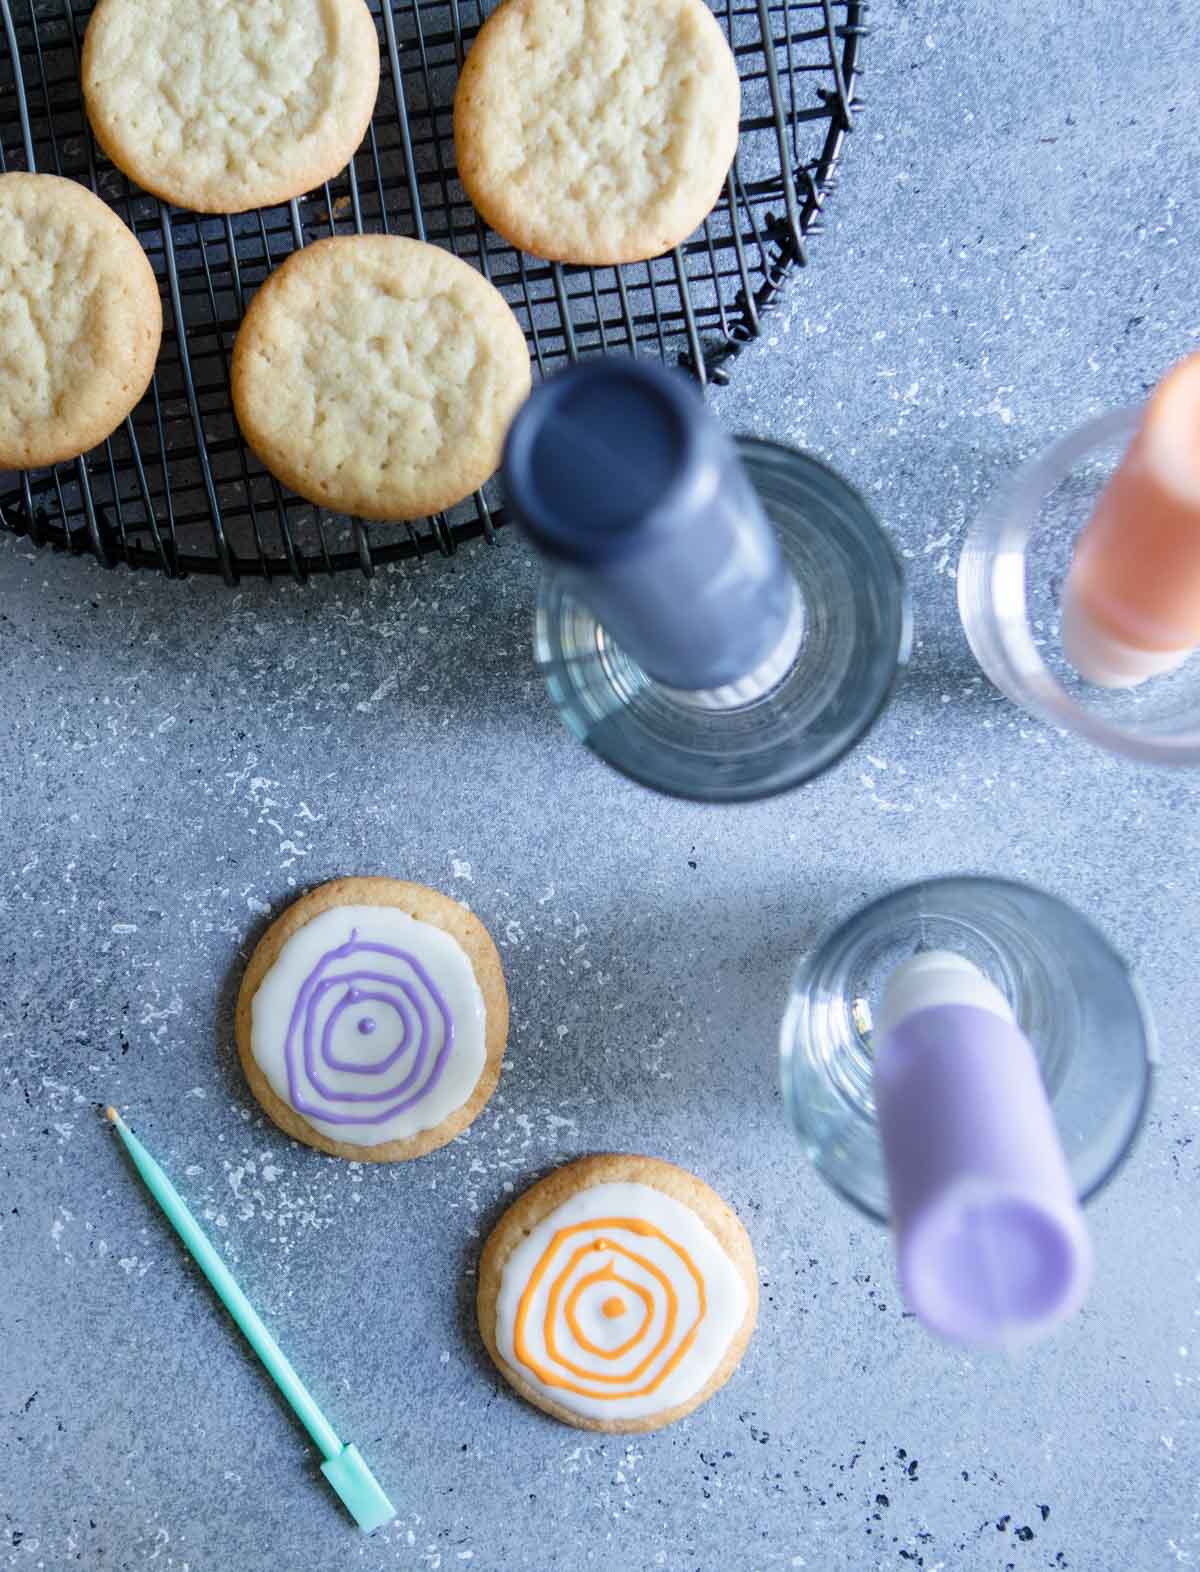 royal icing in plastic tubes stored upside down in glass containers